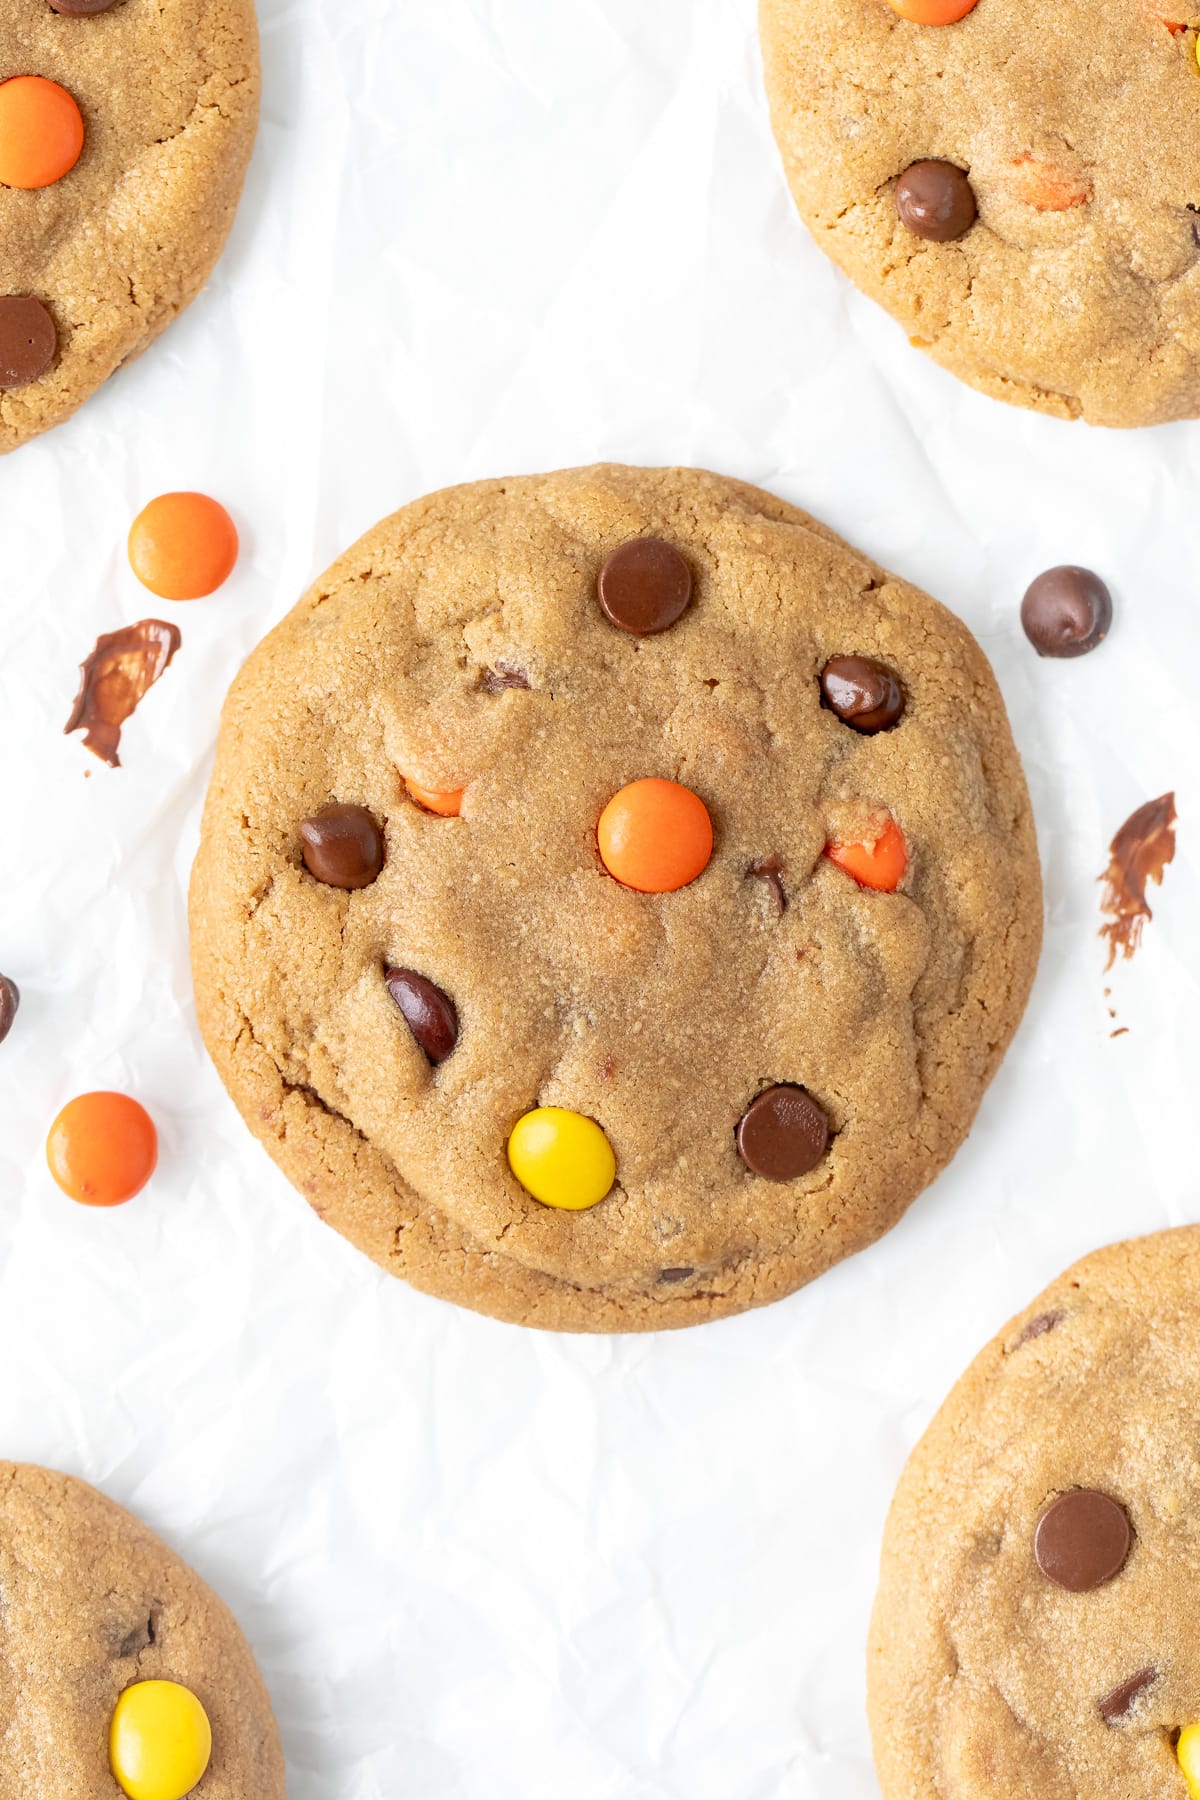 Ultimate peanut butter cookie with peanut butter candies and chocolate chips